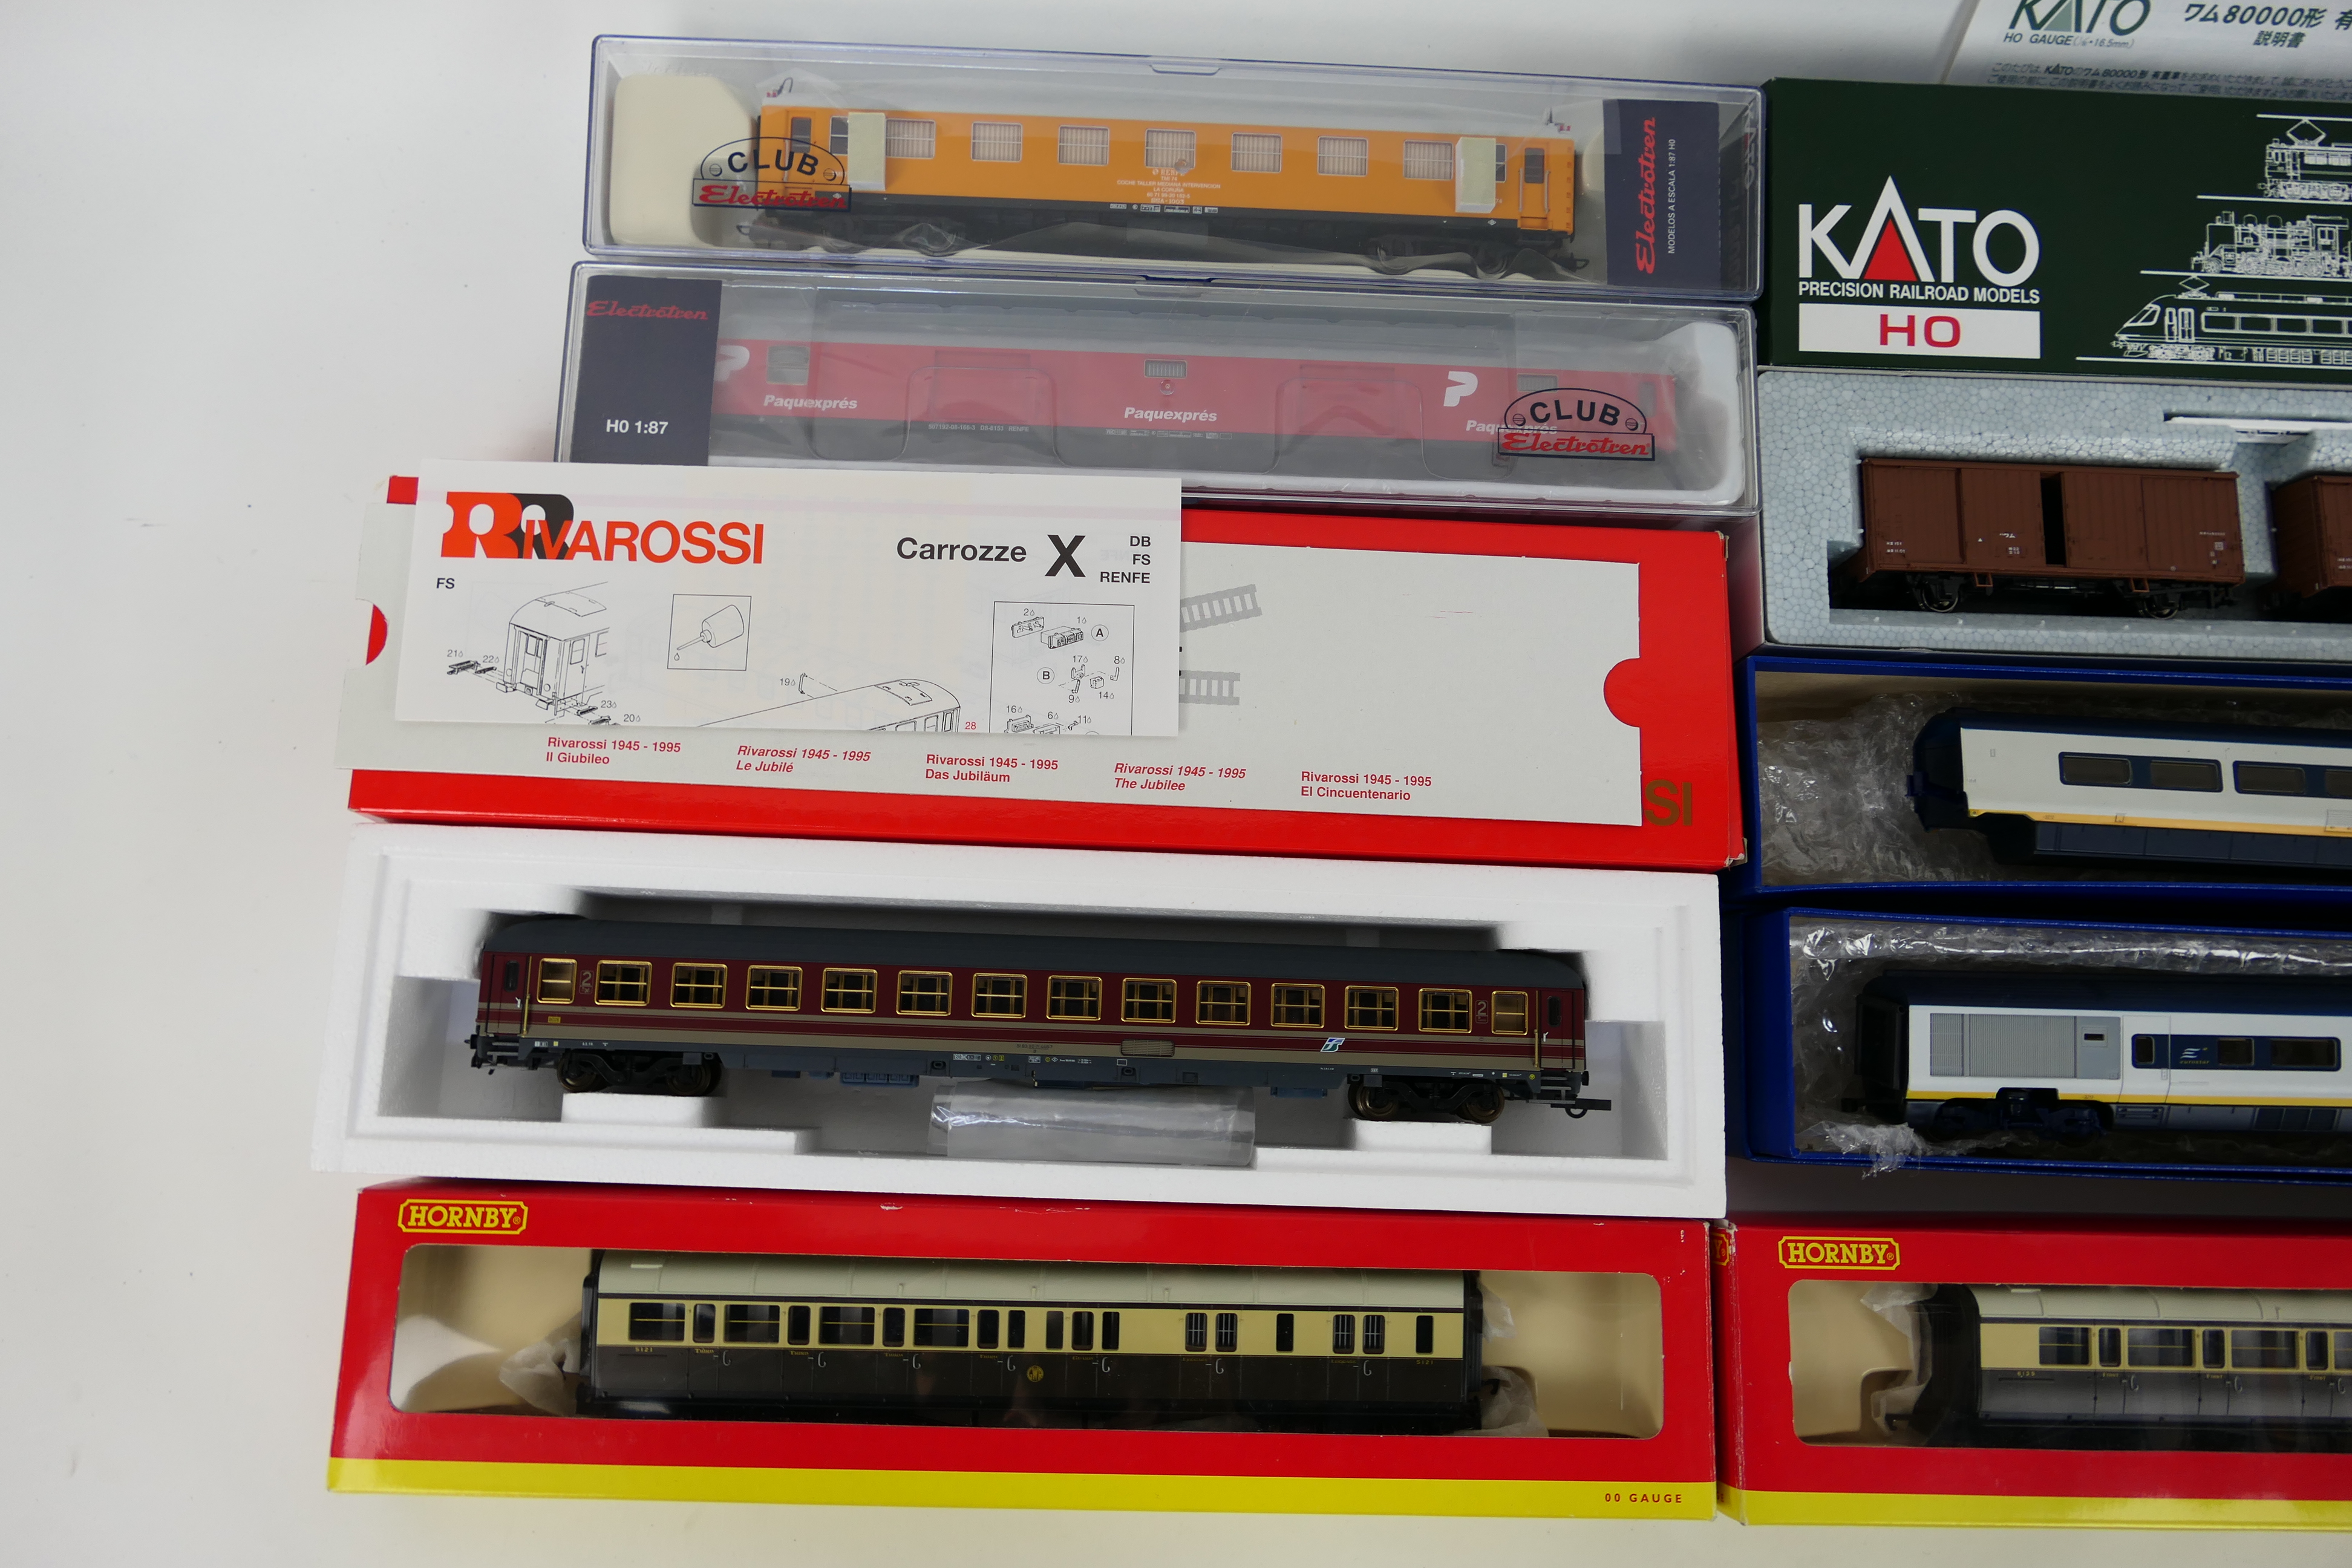 Kato - Hornby - Rivarossi - Electrotren - Eight boxed items of OO and HO gauge passenger and - Image 2 of 3